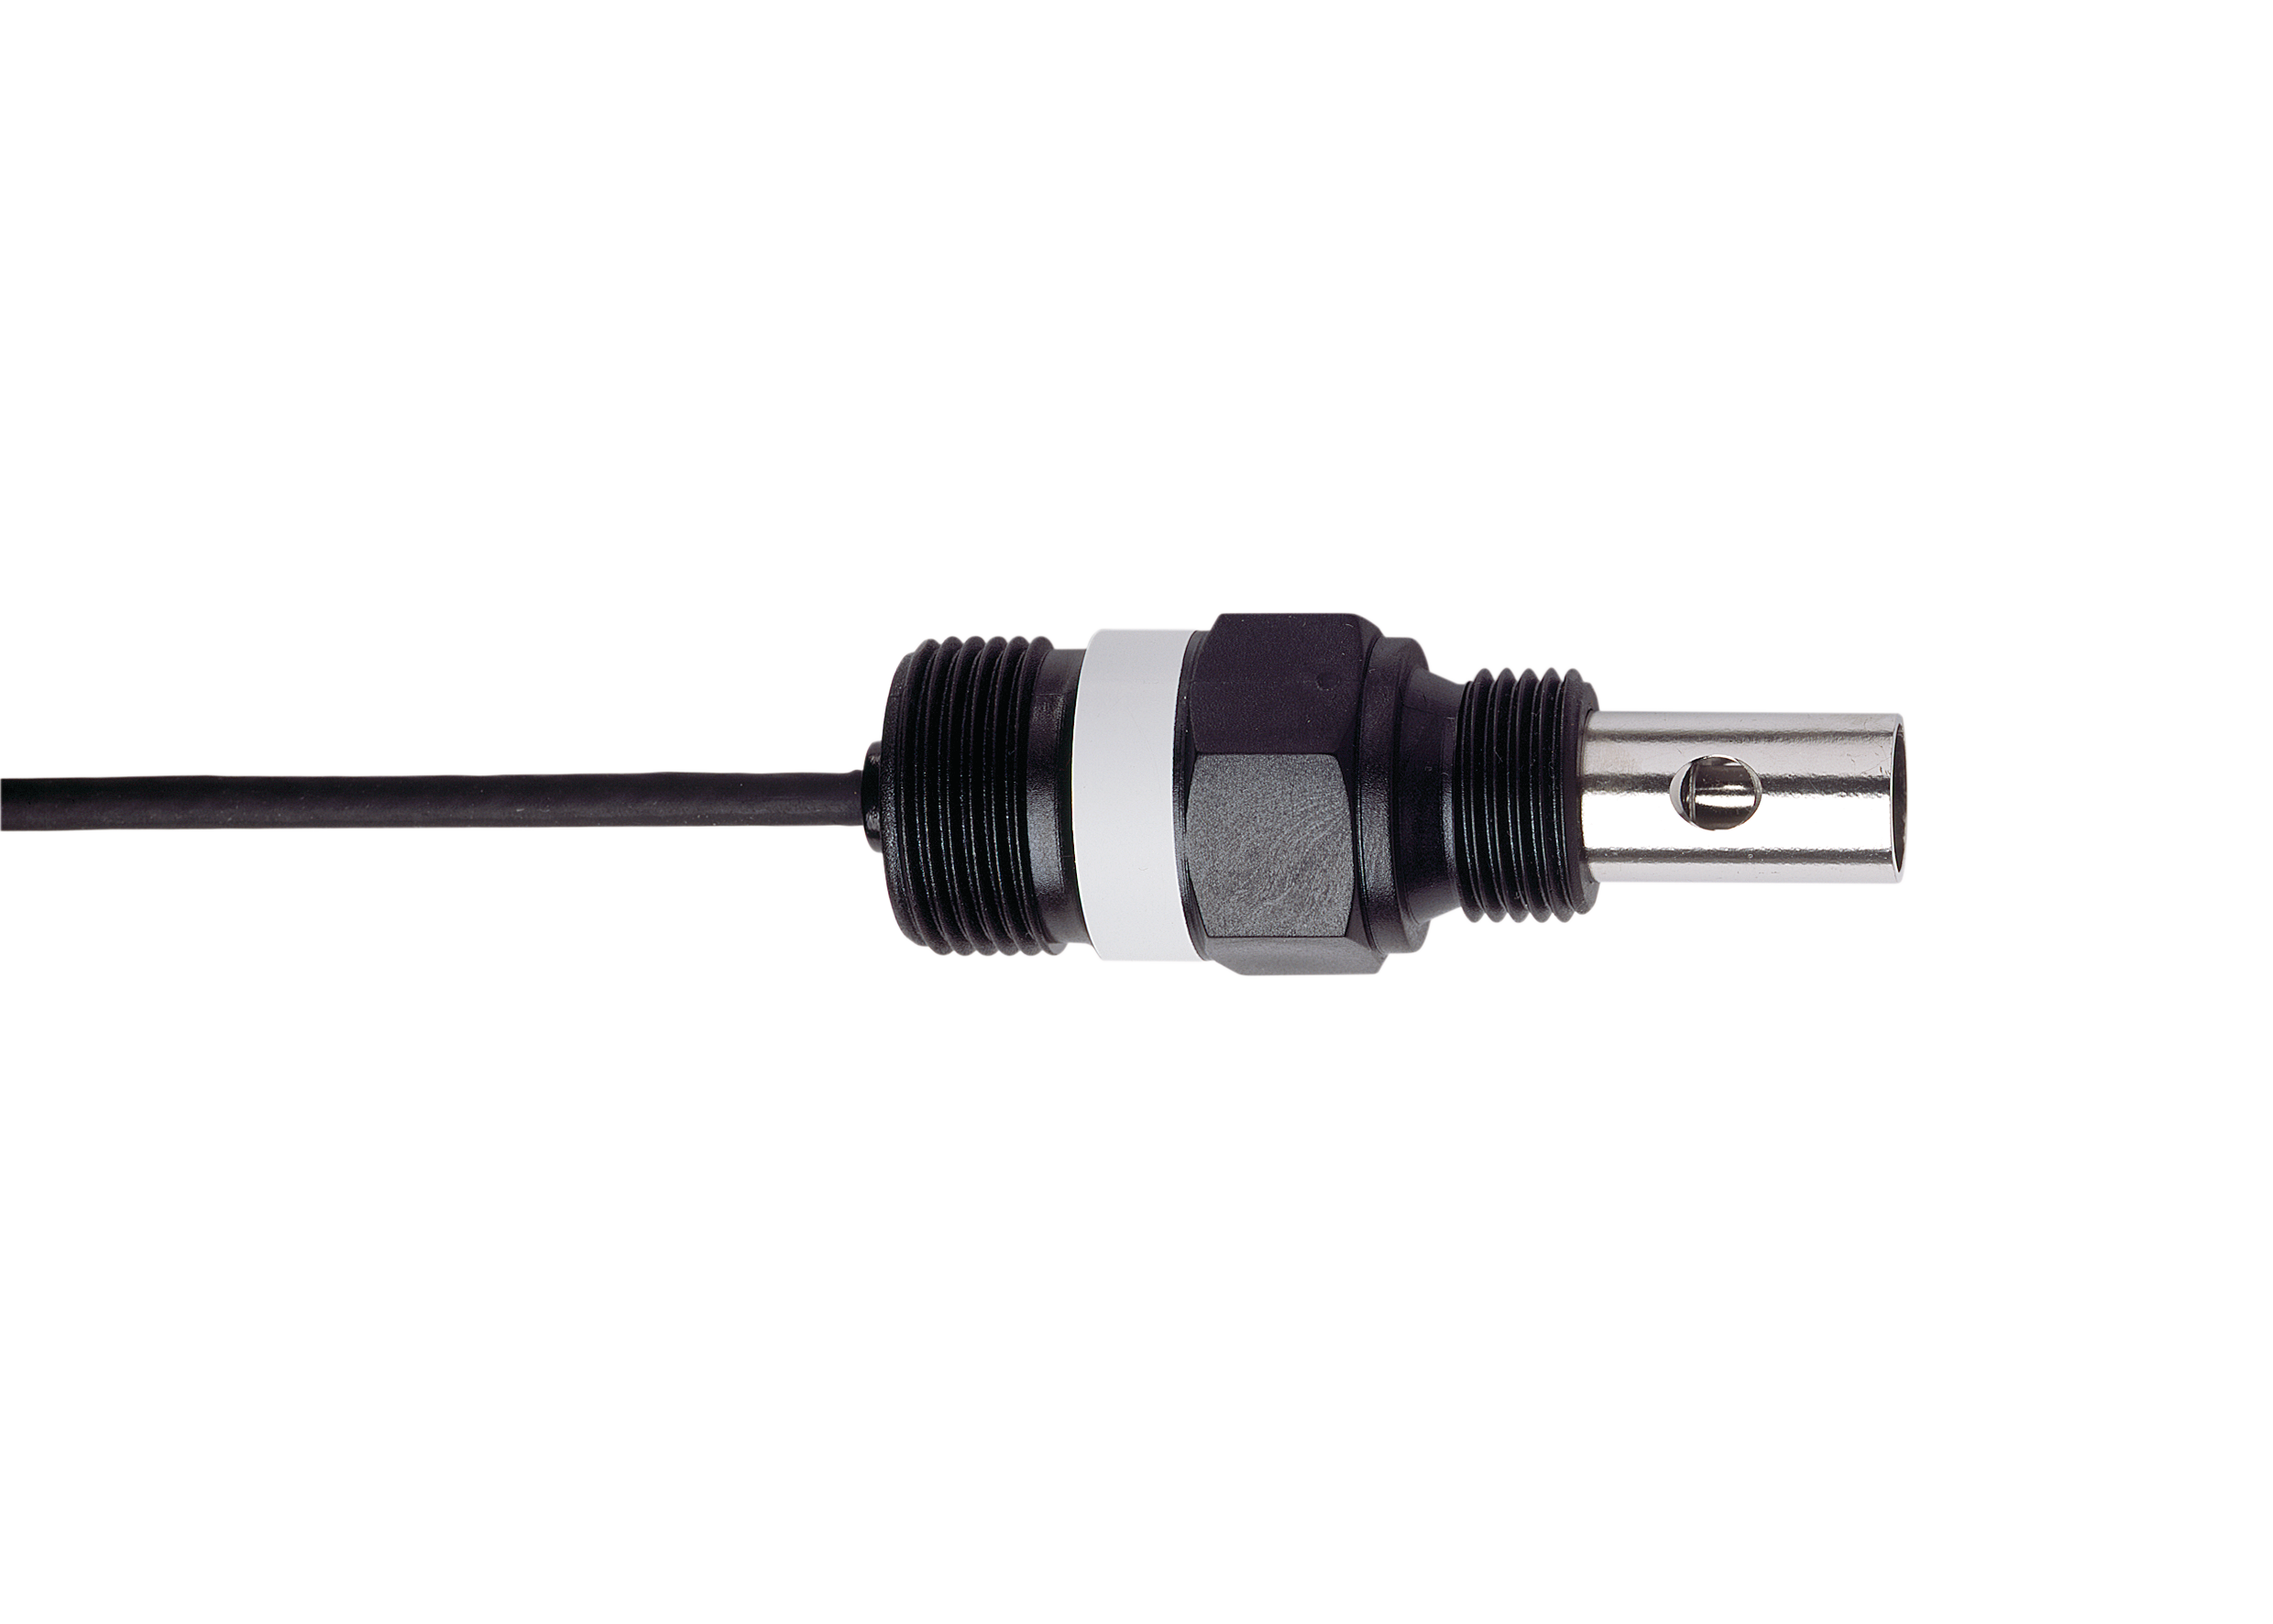 SE610 2-Electrode Conductivity Sensor | Fixed cable | For measuring low conductivities in water